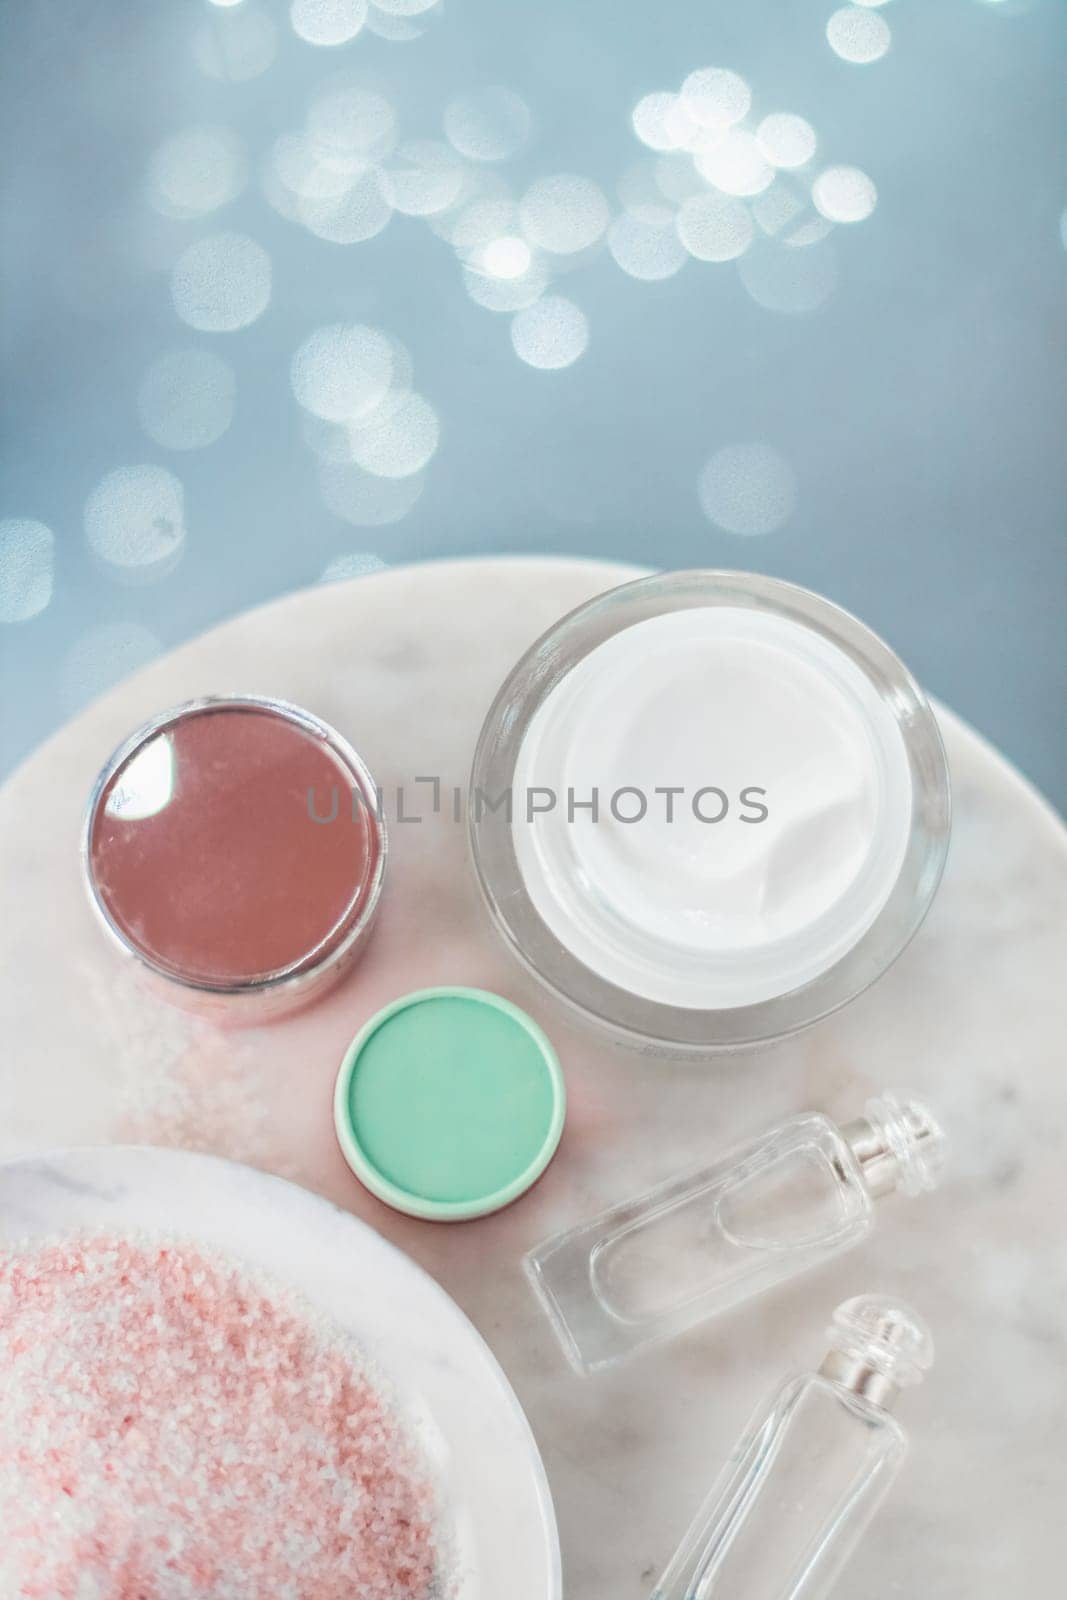 sea salt body scrub - beauty, spa and body care styled concept by Anneleven